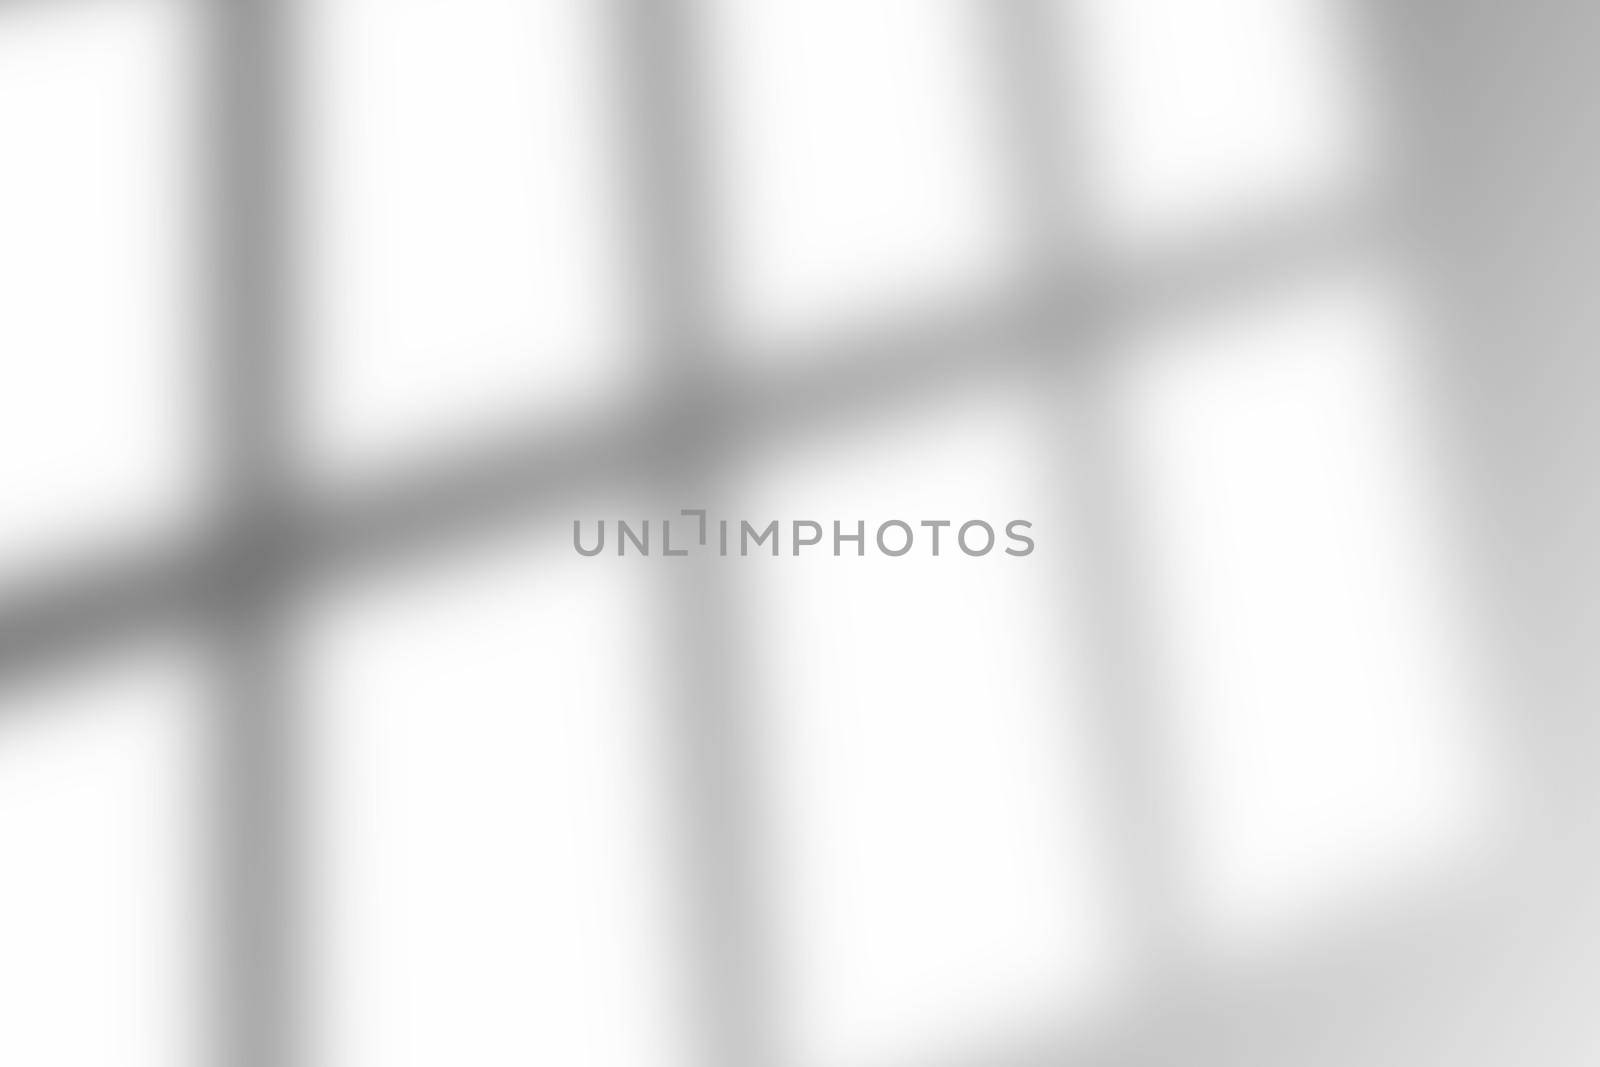 Shadow of window overlay on white texture background. Use for decorative product presentation. by kaisorn